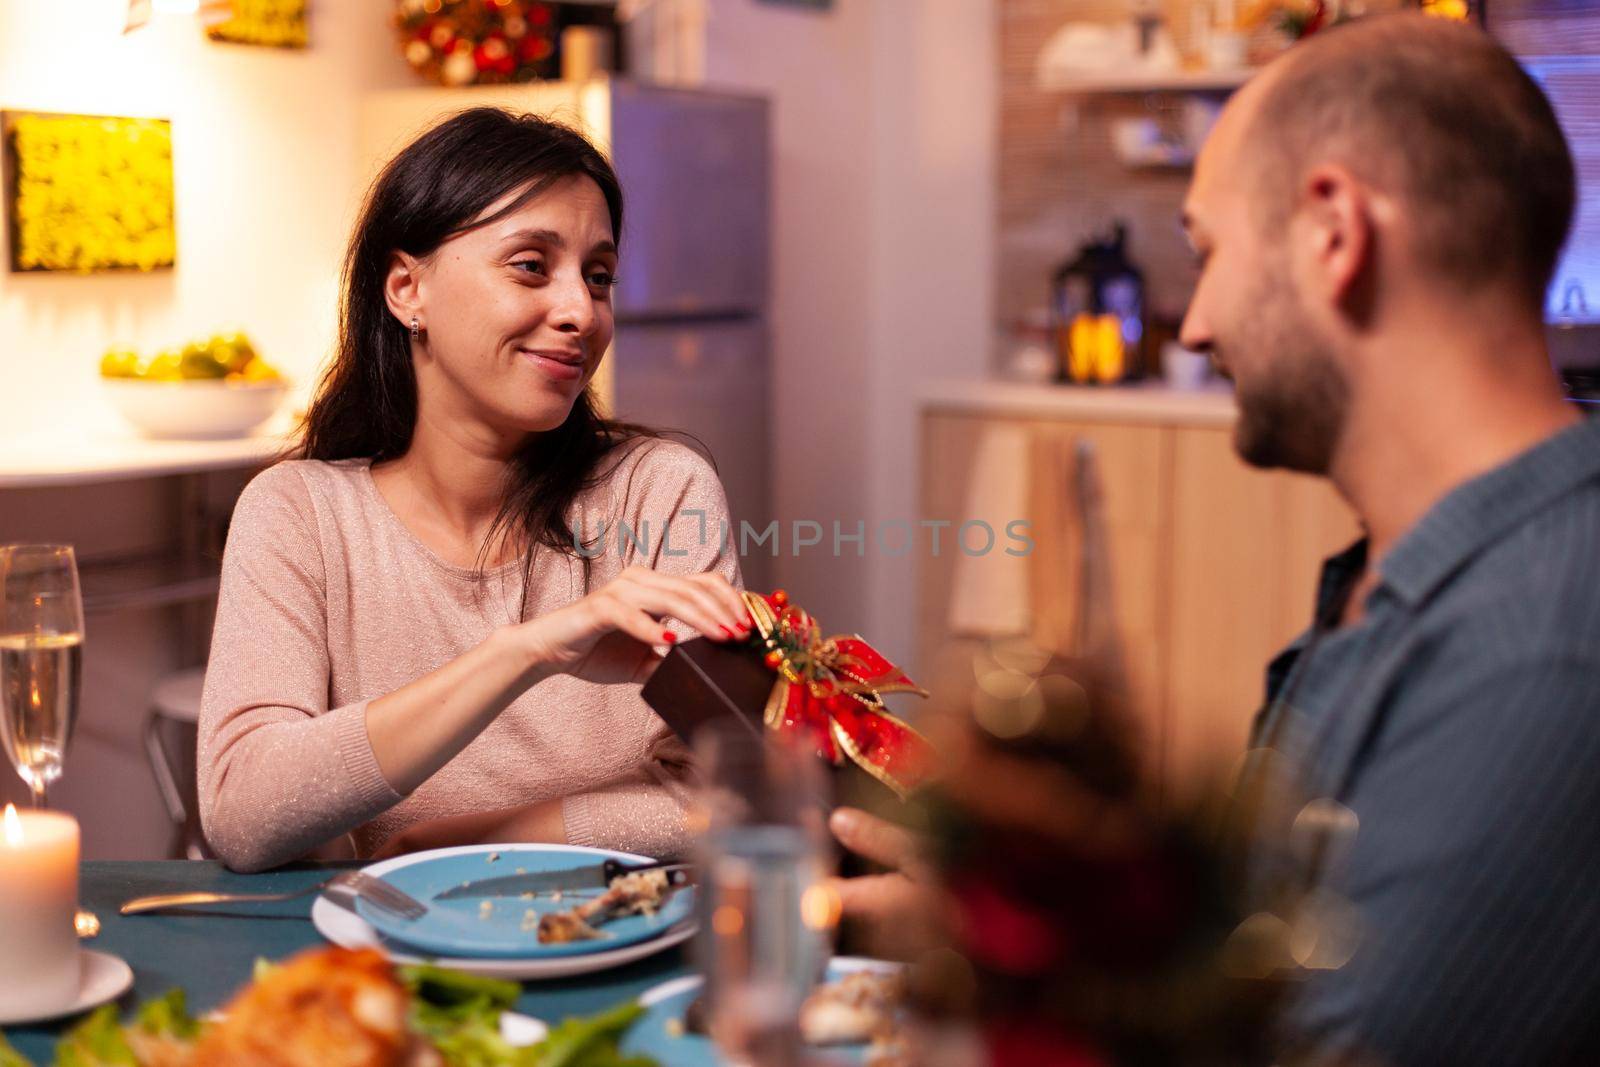 Happy couple enjoying christmas holiday surprising with xmas present with ribbon on it sitting at table in x-mas decorated kitchen. Cheerful family celebrating winter holiday spending time together